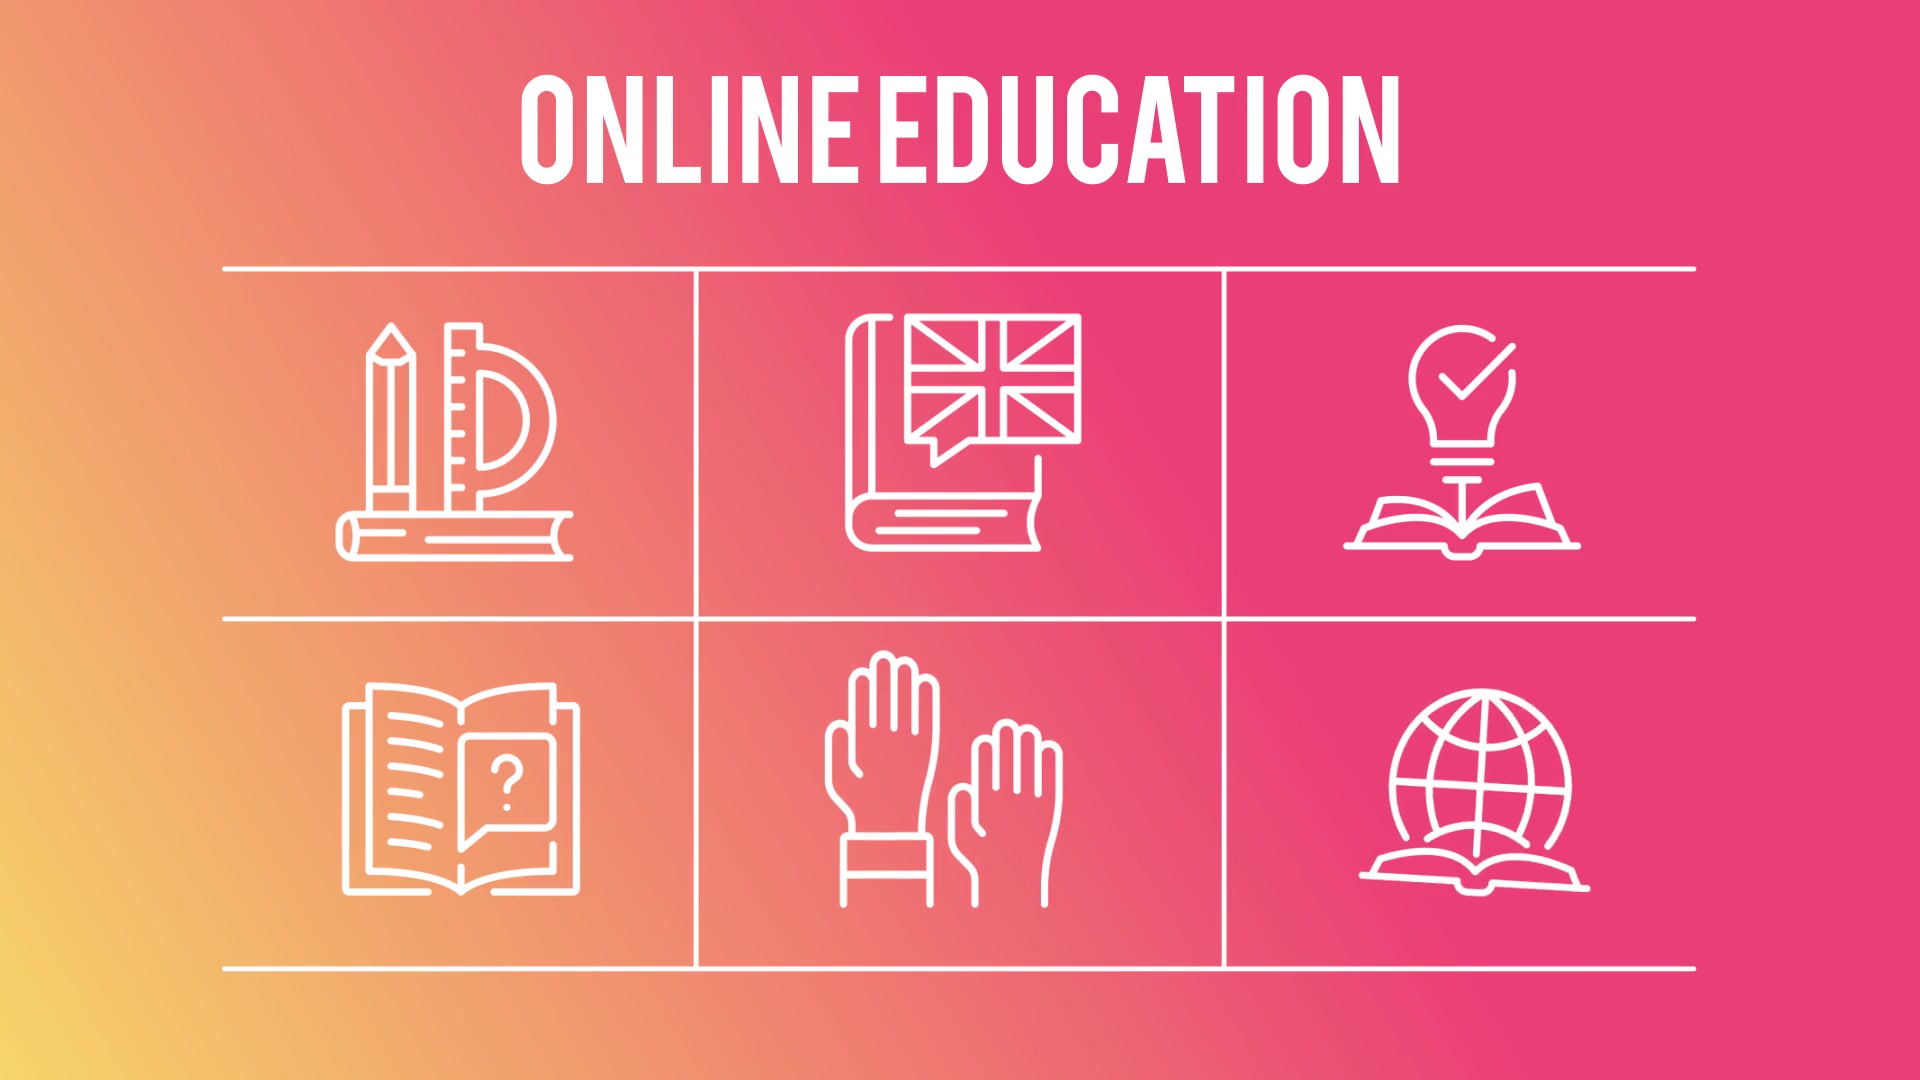 Education & Knowledge 50 Thin Line Icons - Download Videohive 23172162